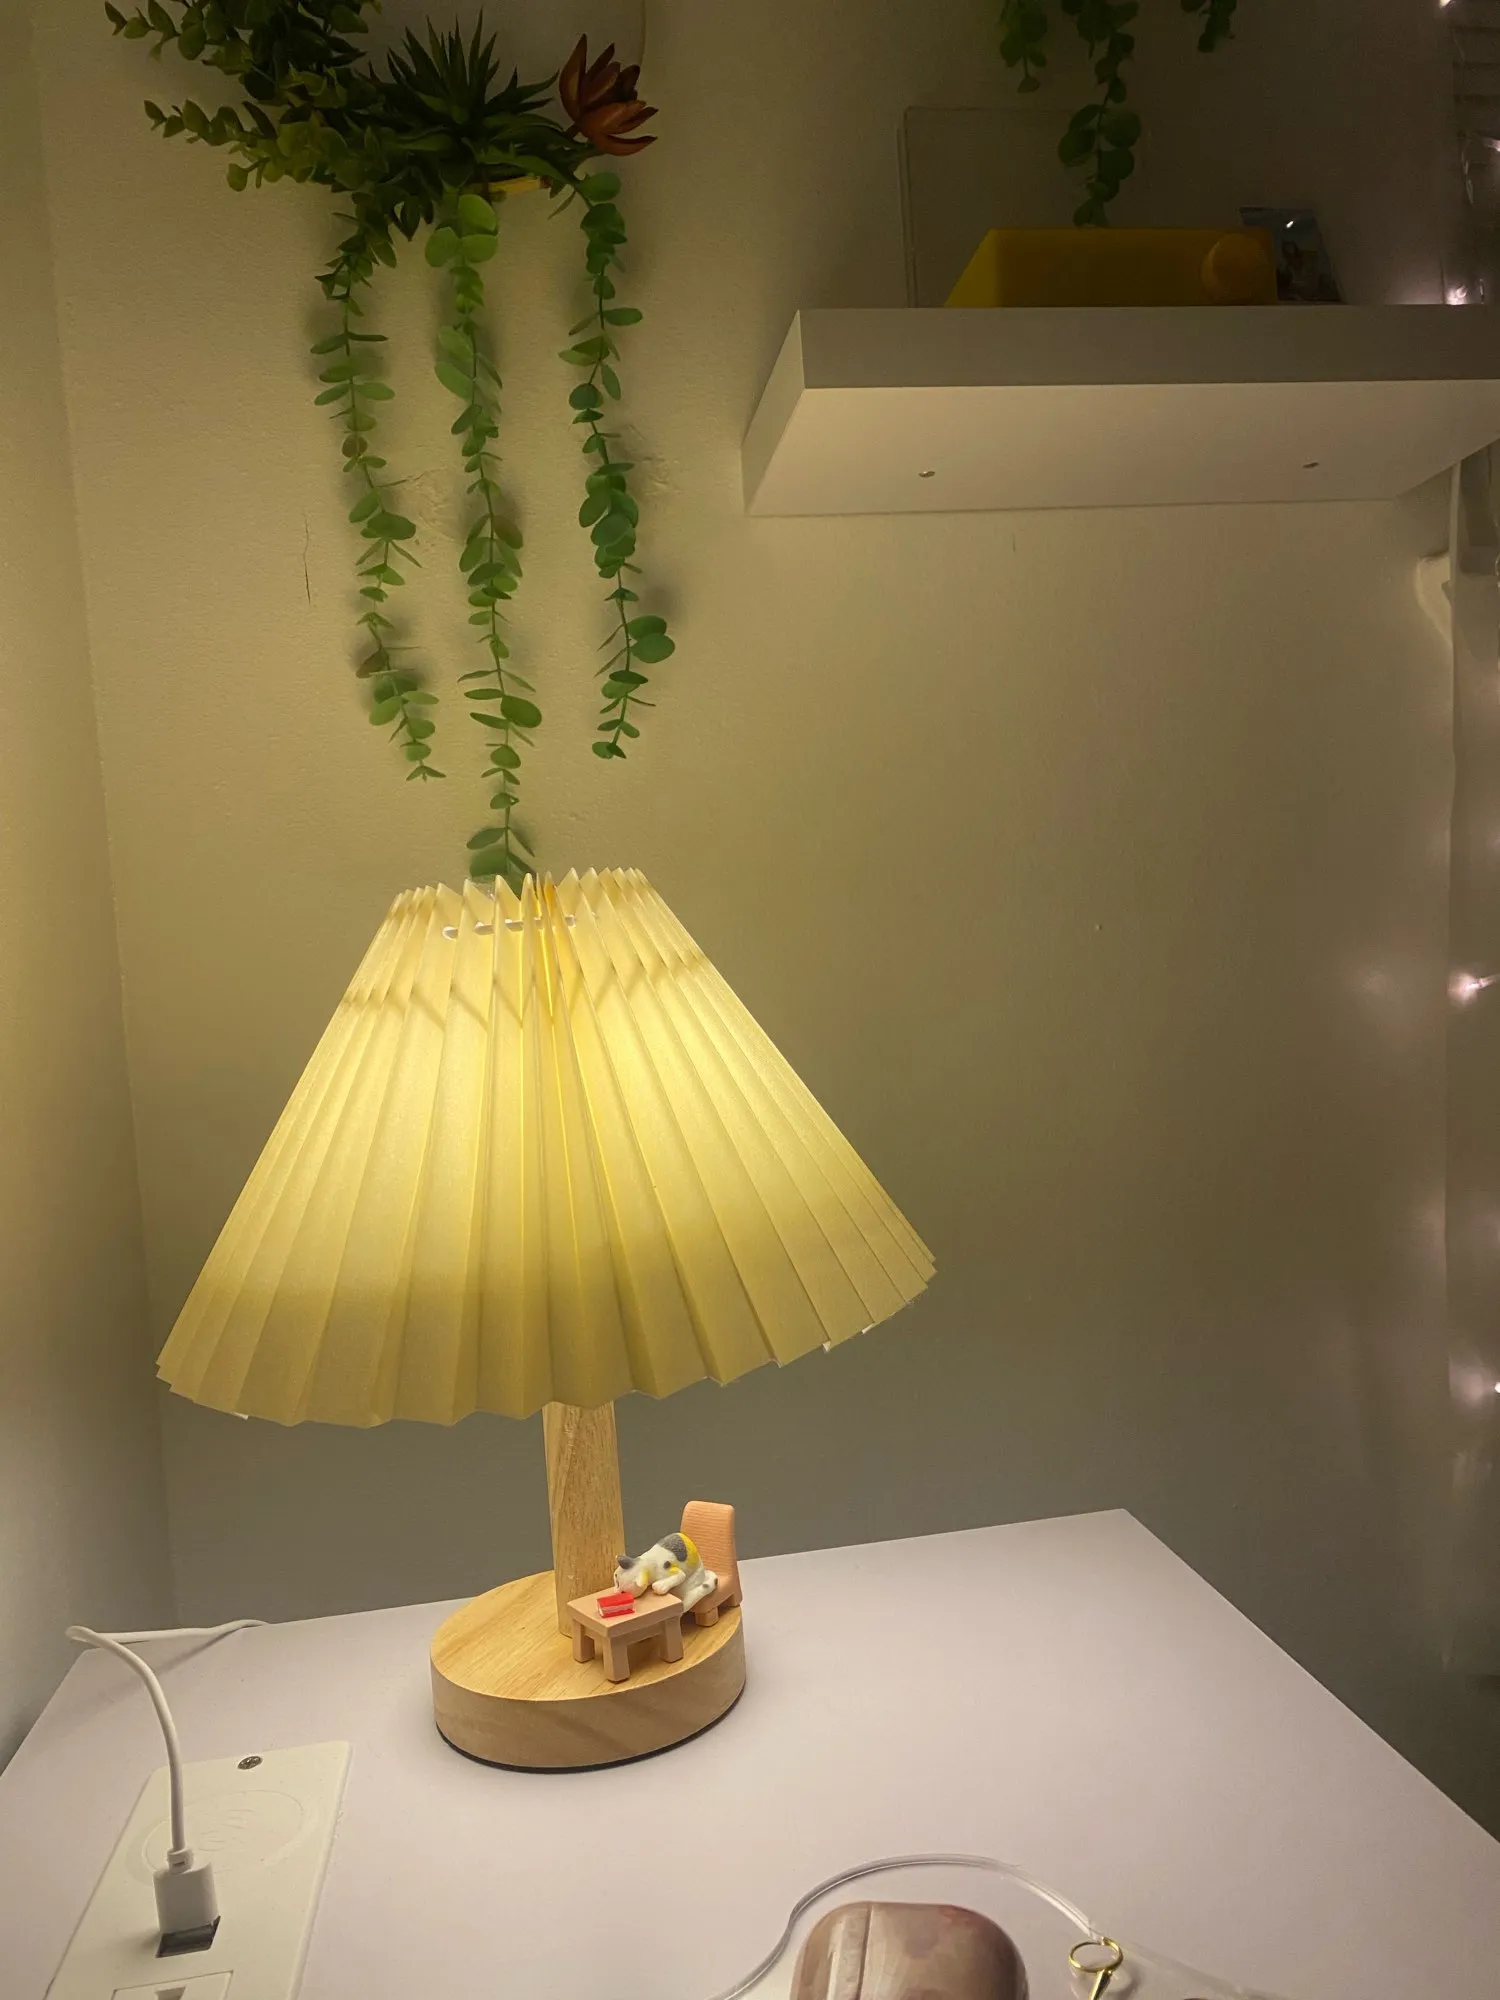 Nordic Pleated Table Lamp - Foldable, Adjustable, USB Powered photo review